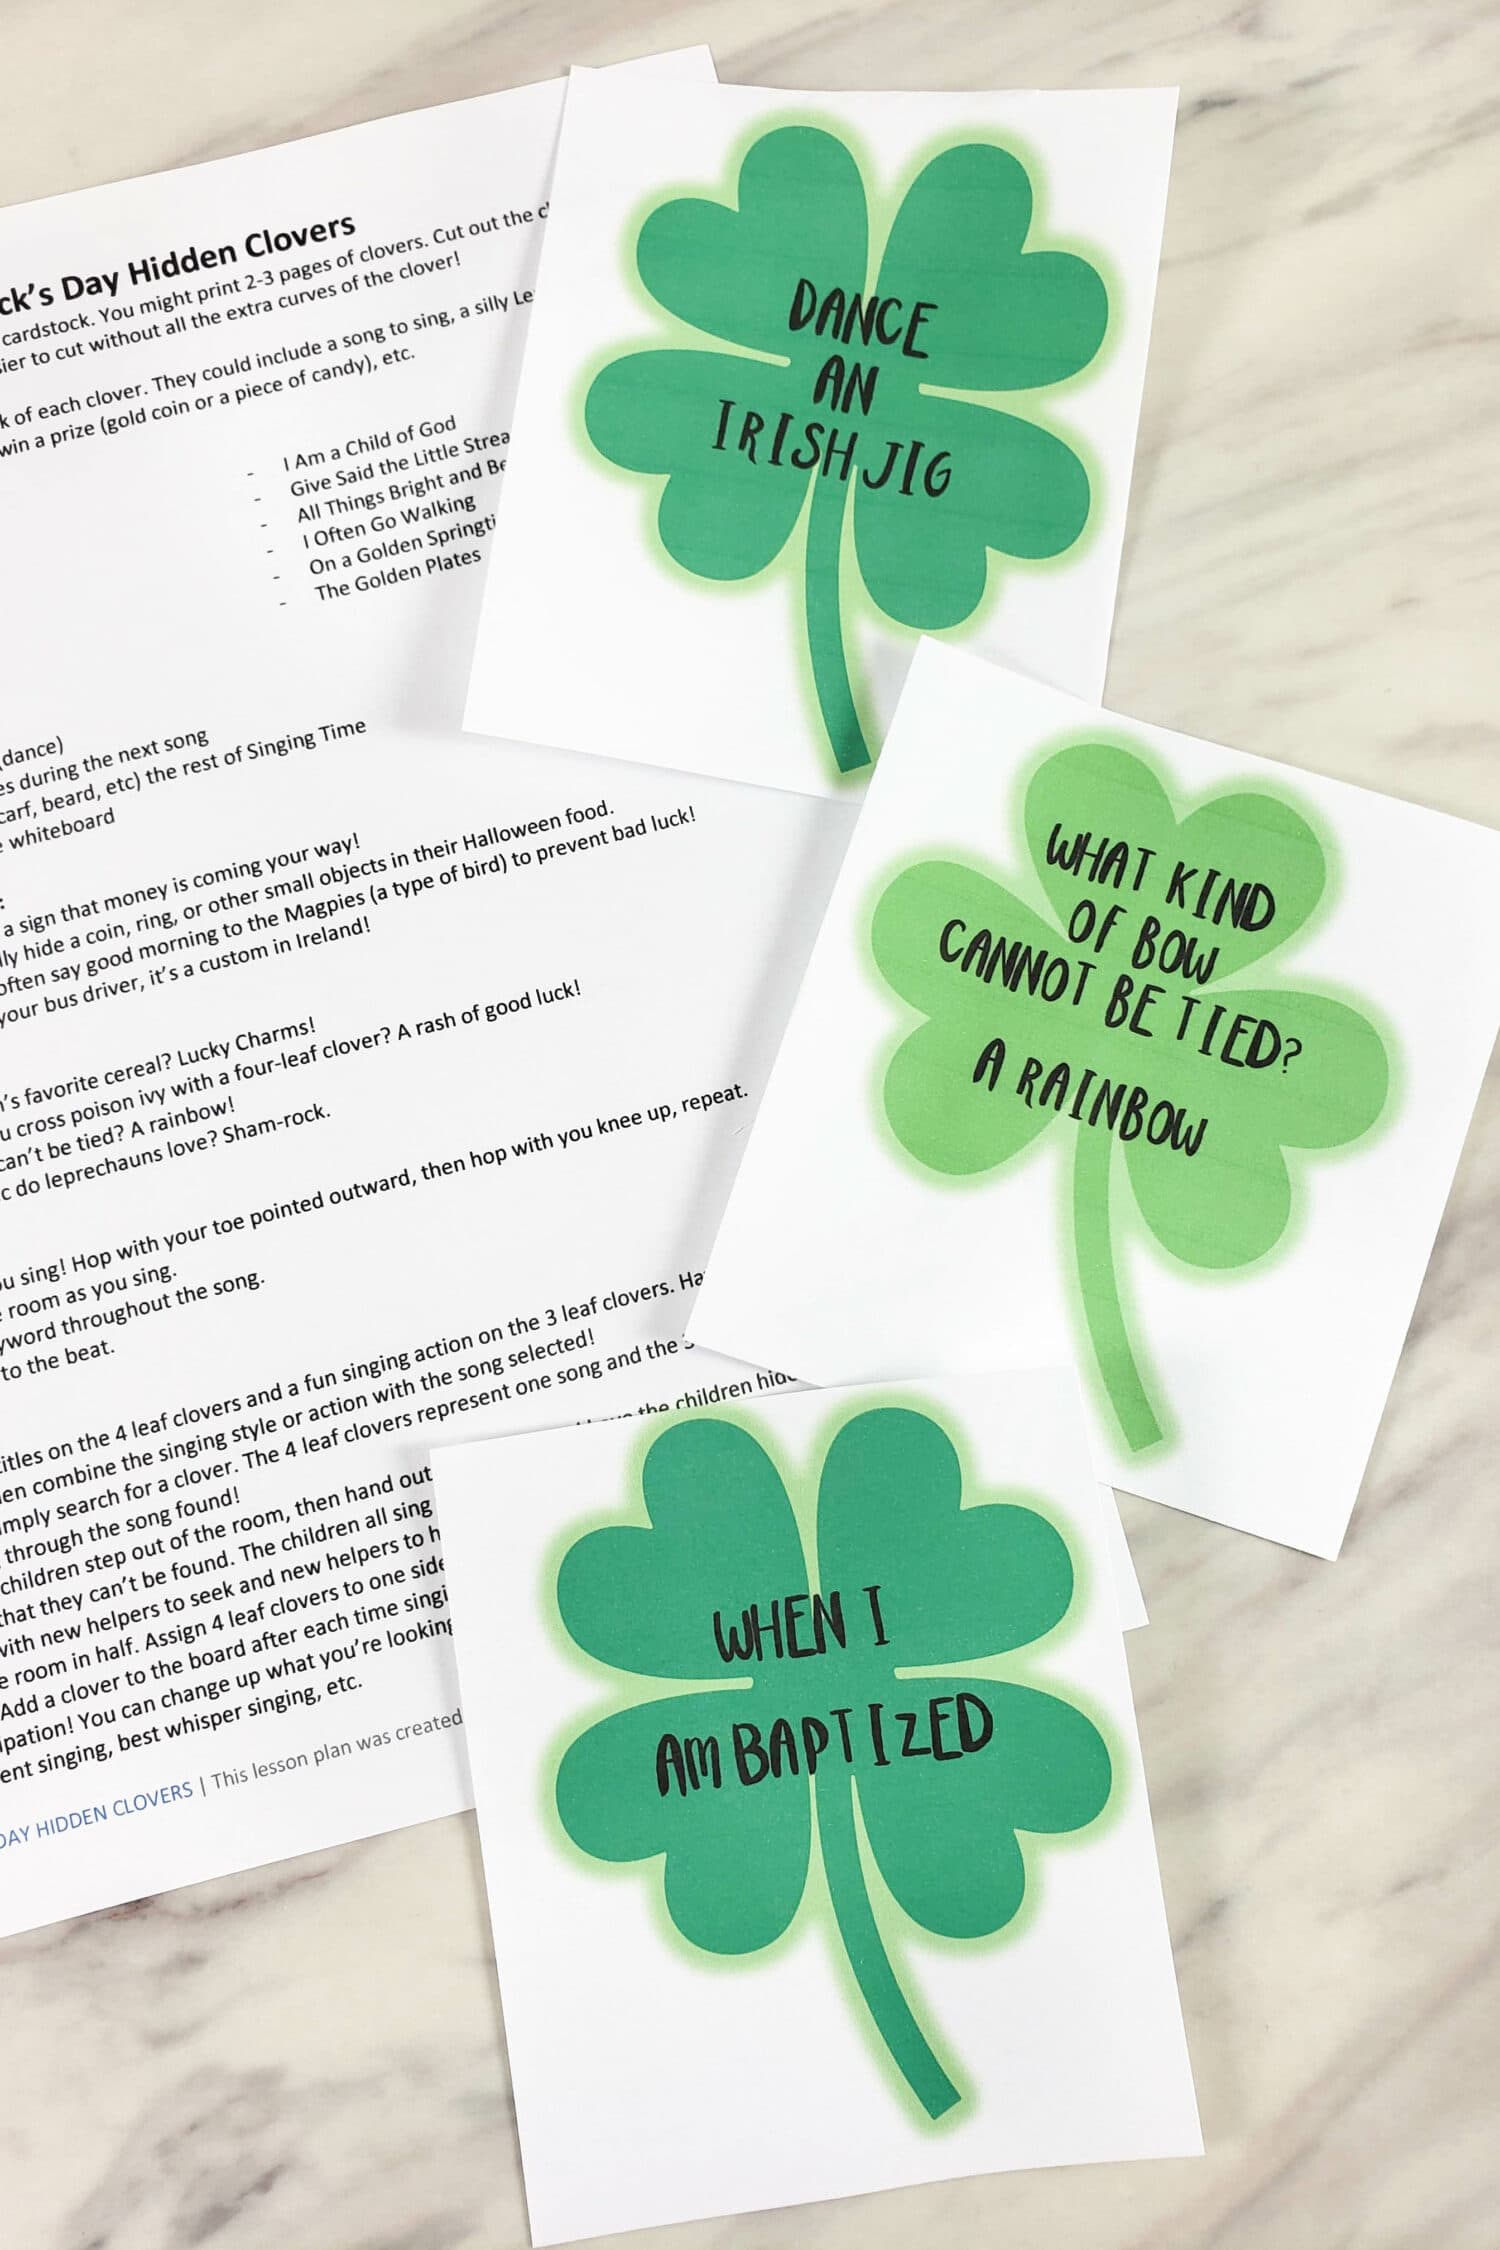 St Patrick's Day Singing Time Idea Hidden Clovers Game with jokes, dares, Primary songs, Irish facts, and more!